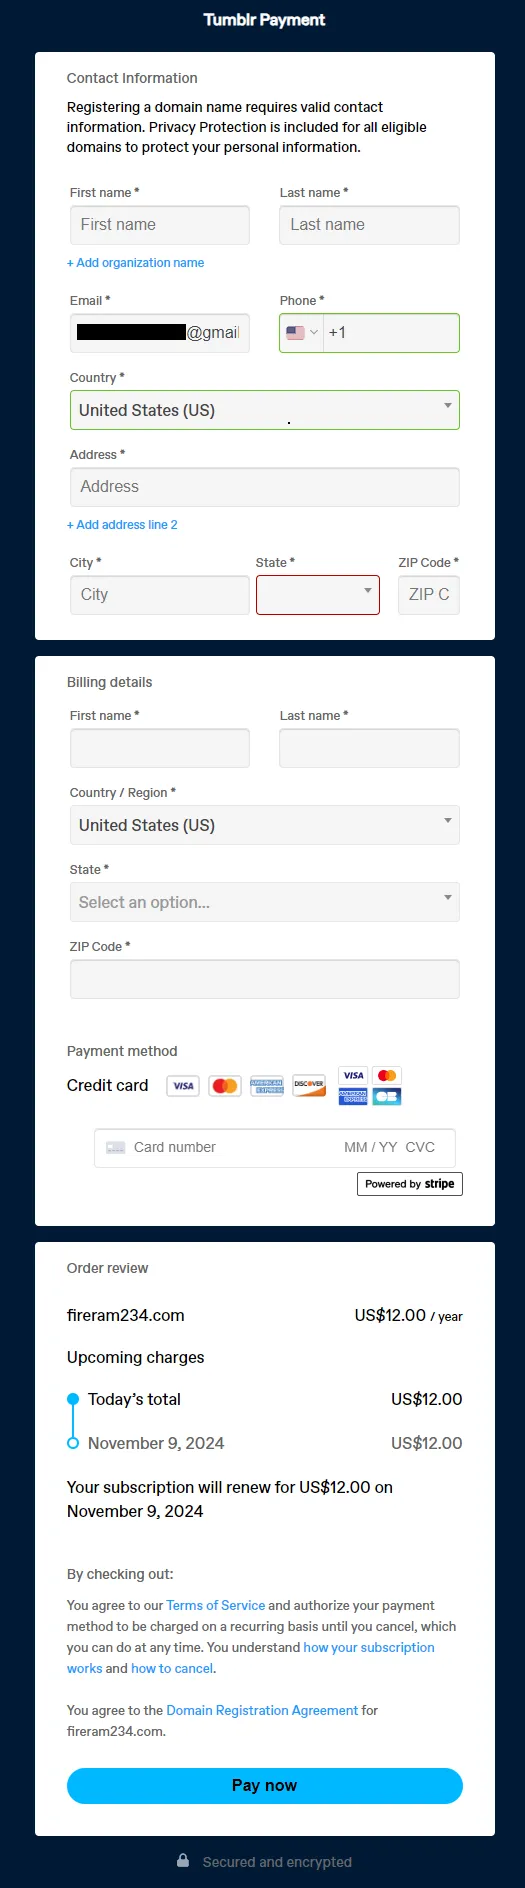 Provide your Contact Information, Billing Details, and Payment Details.  Click on the Pay now button.